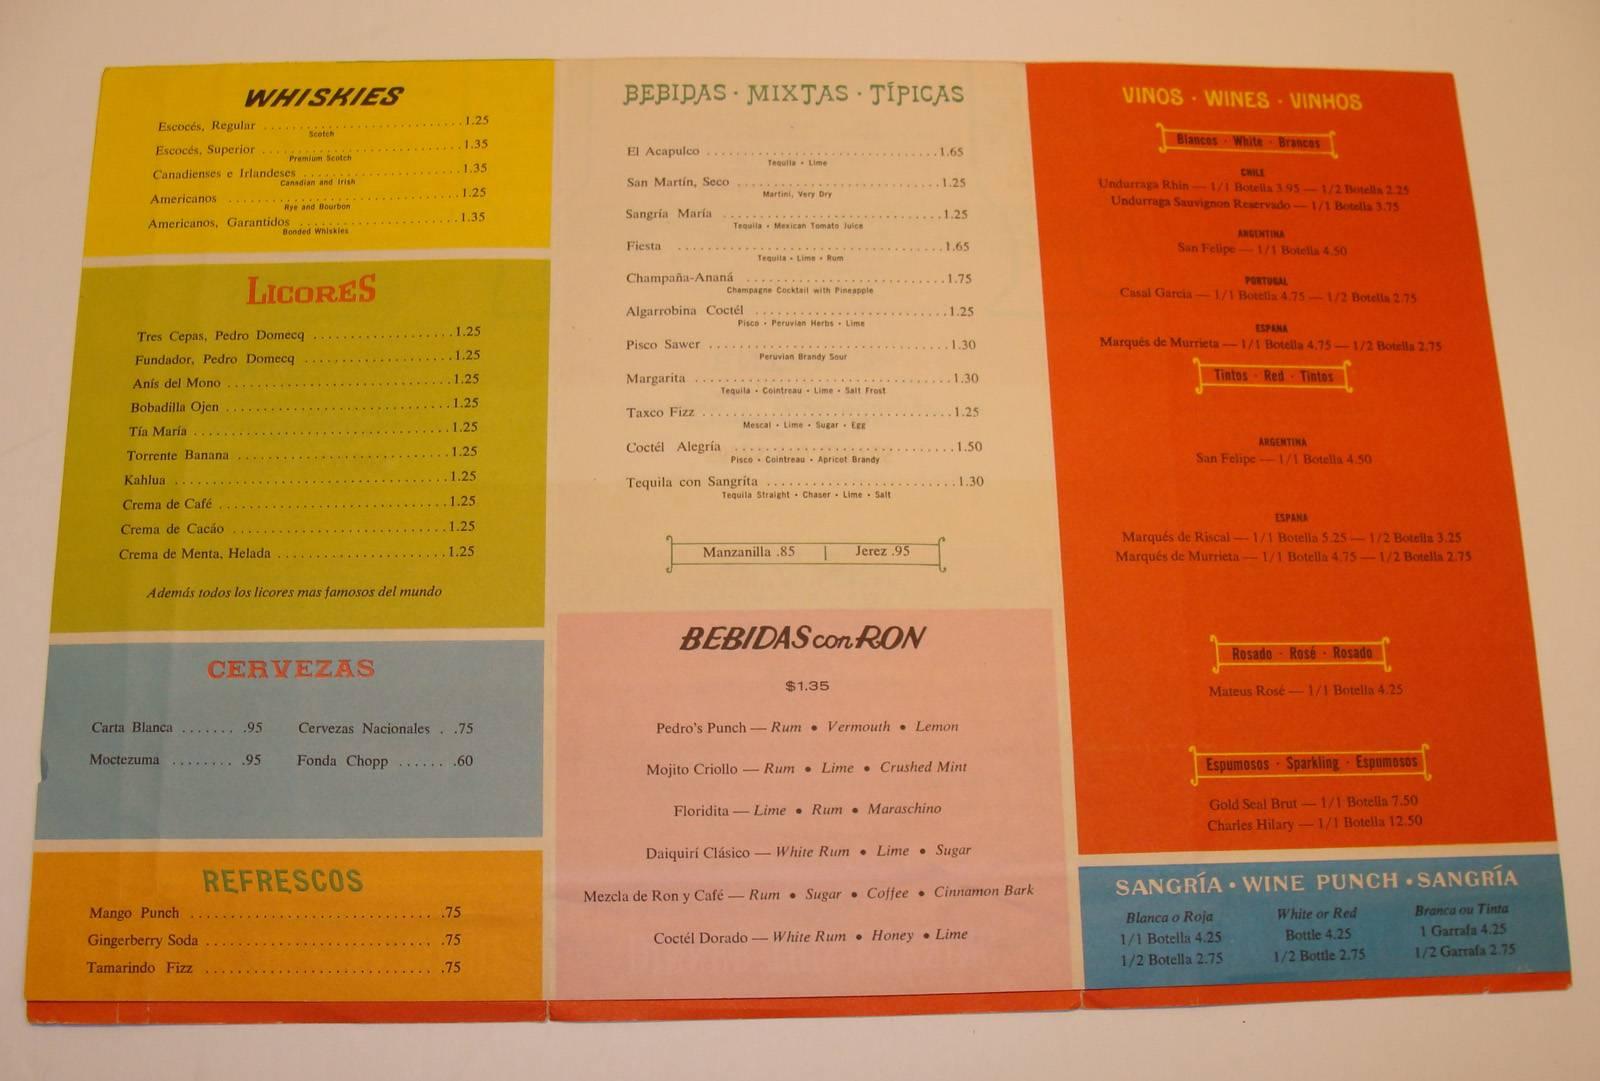 Midcentury Folk Art.
Rare dinner menu designed for La Fonda del Sol Restaurant, NYC,
1960. One of the earliest examples of complete design environment by the iconic Alexander Girard (1907-1993). This example is identical to the menu in the